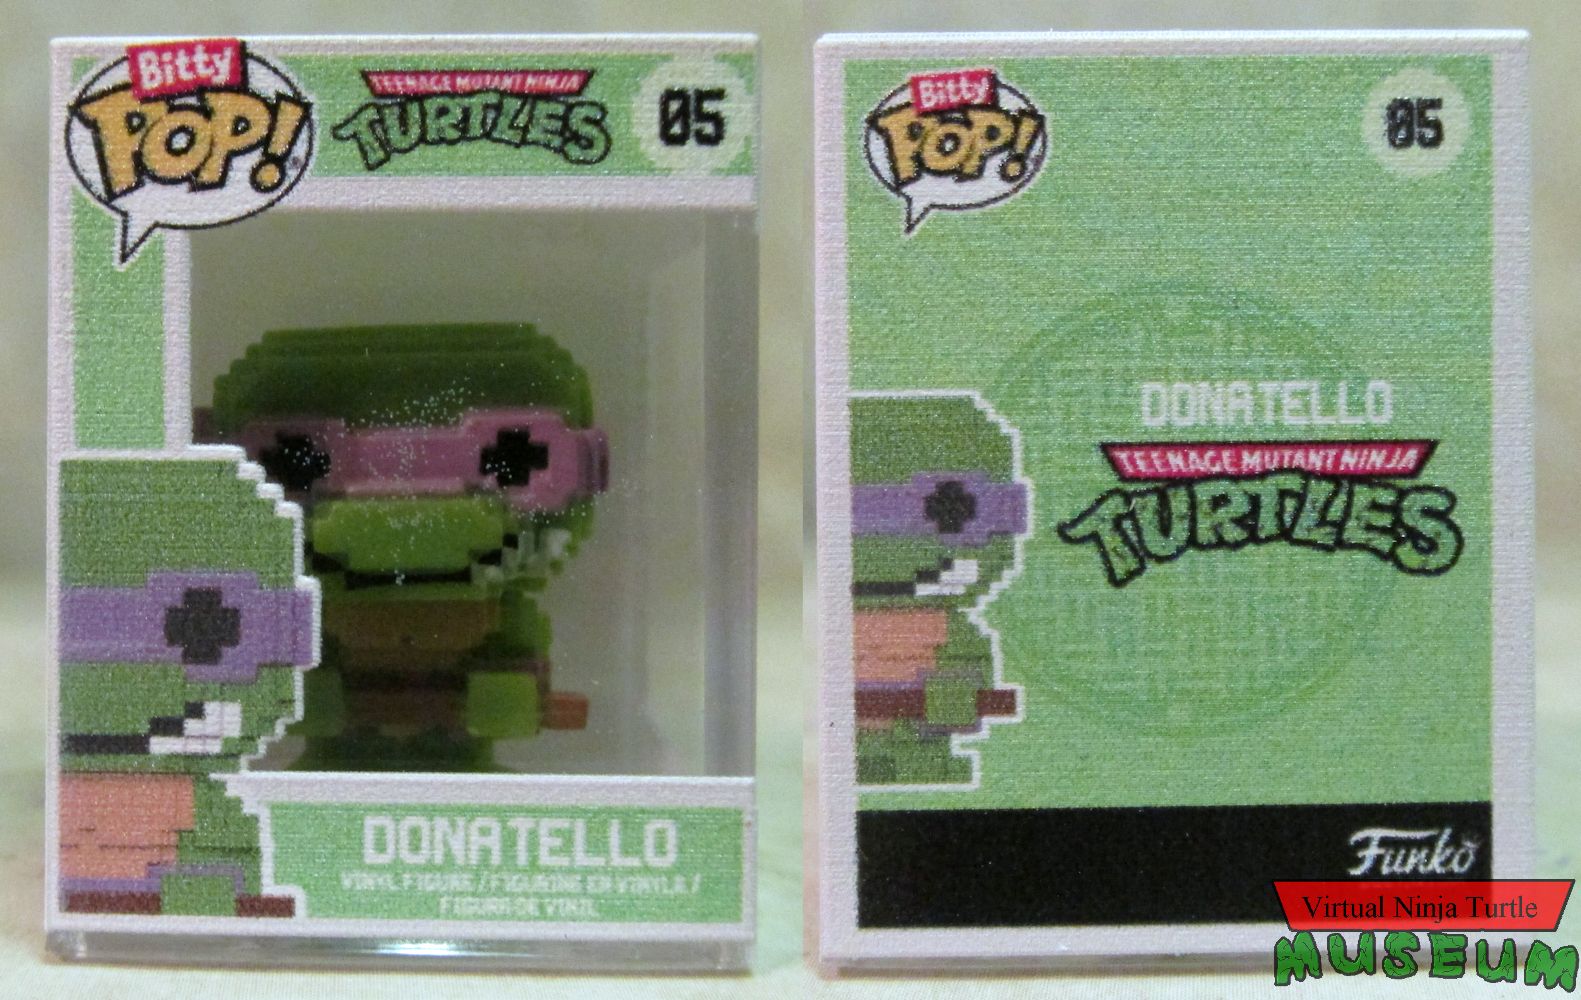 8Bit Donatello in case front and back